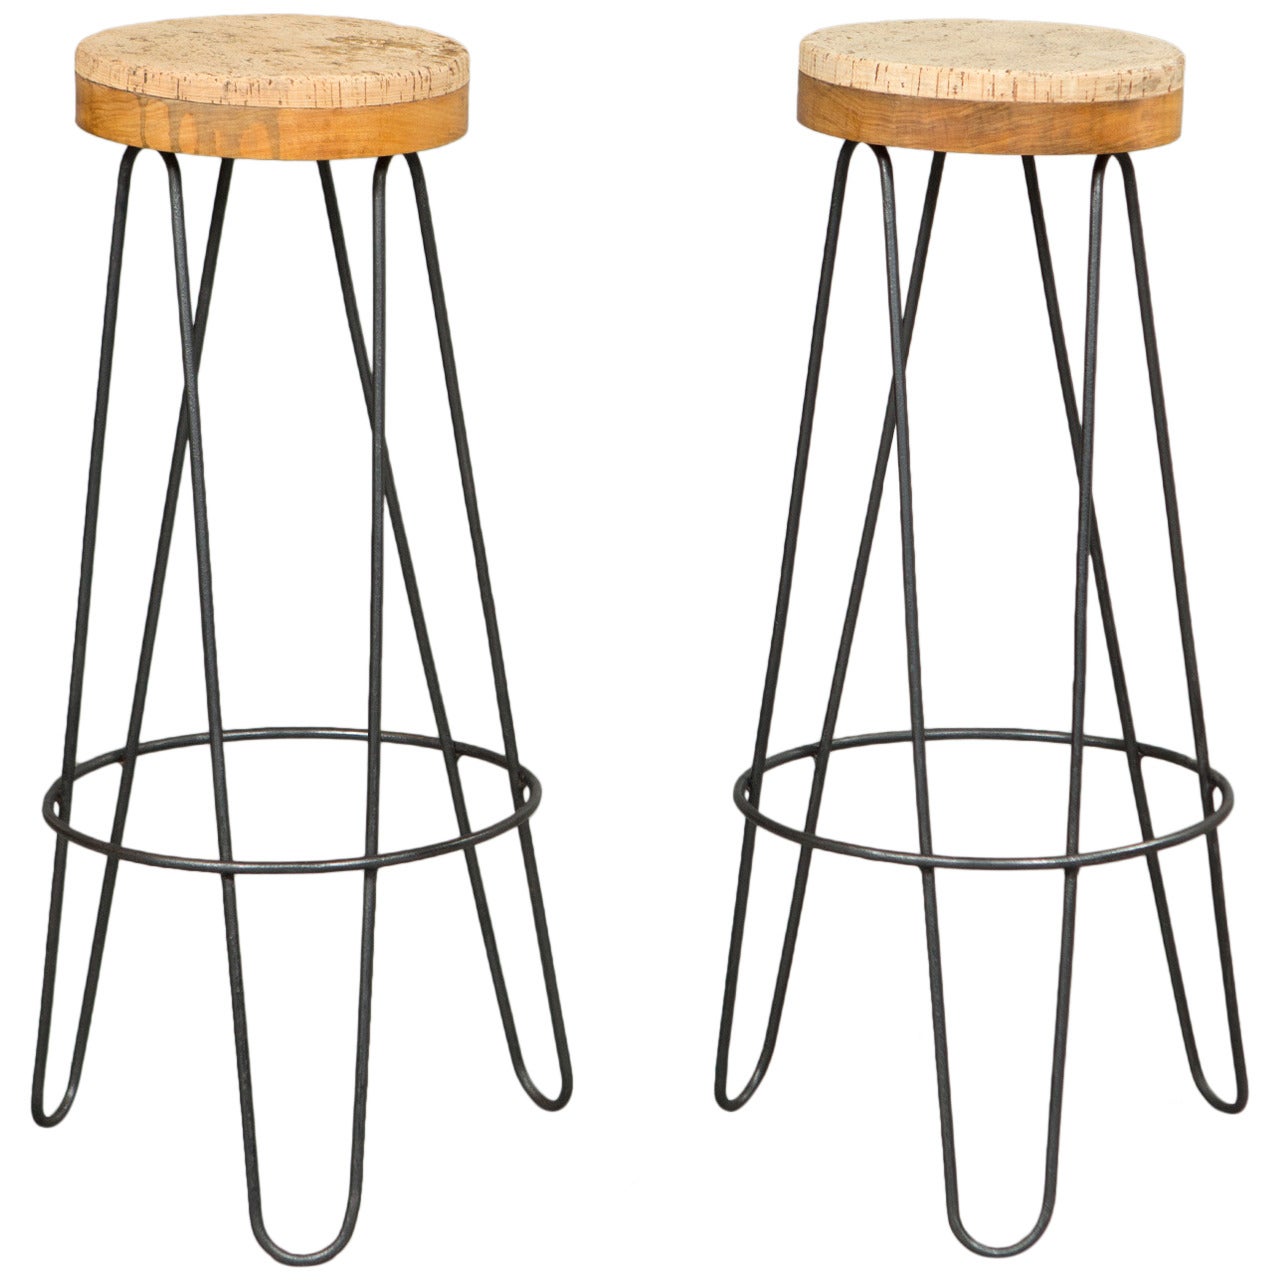 Pair of 1960s Industrial Stools with Cork Tops